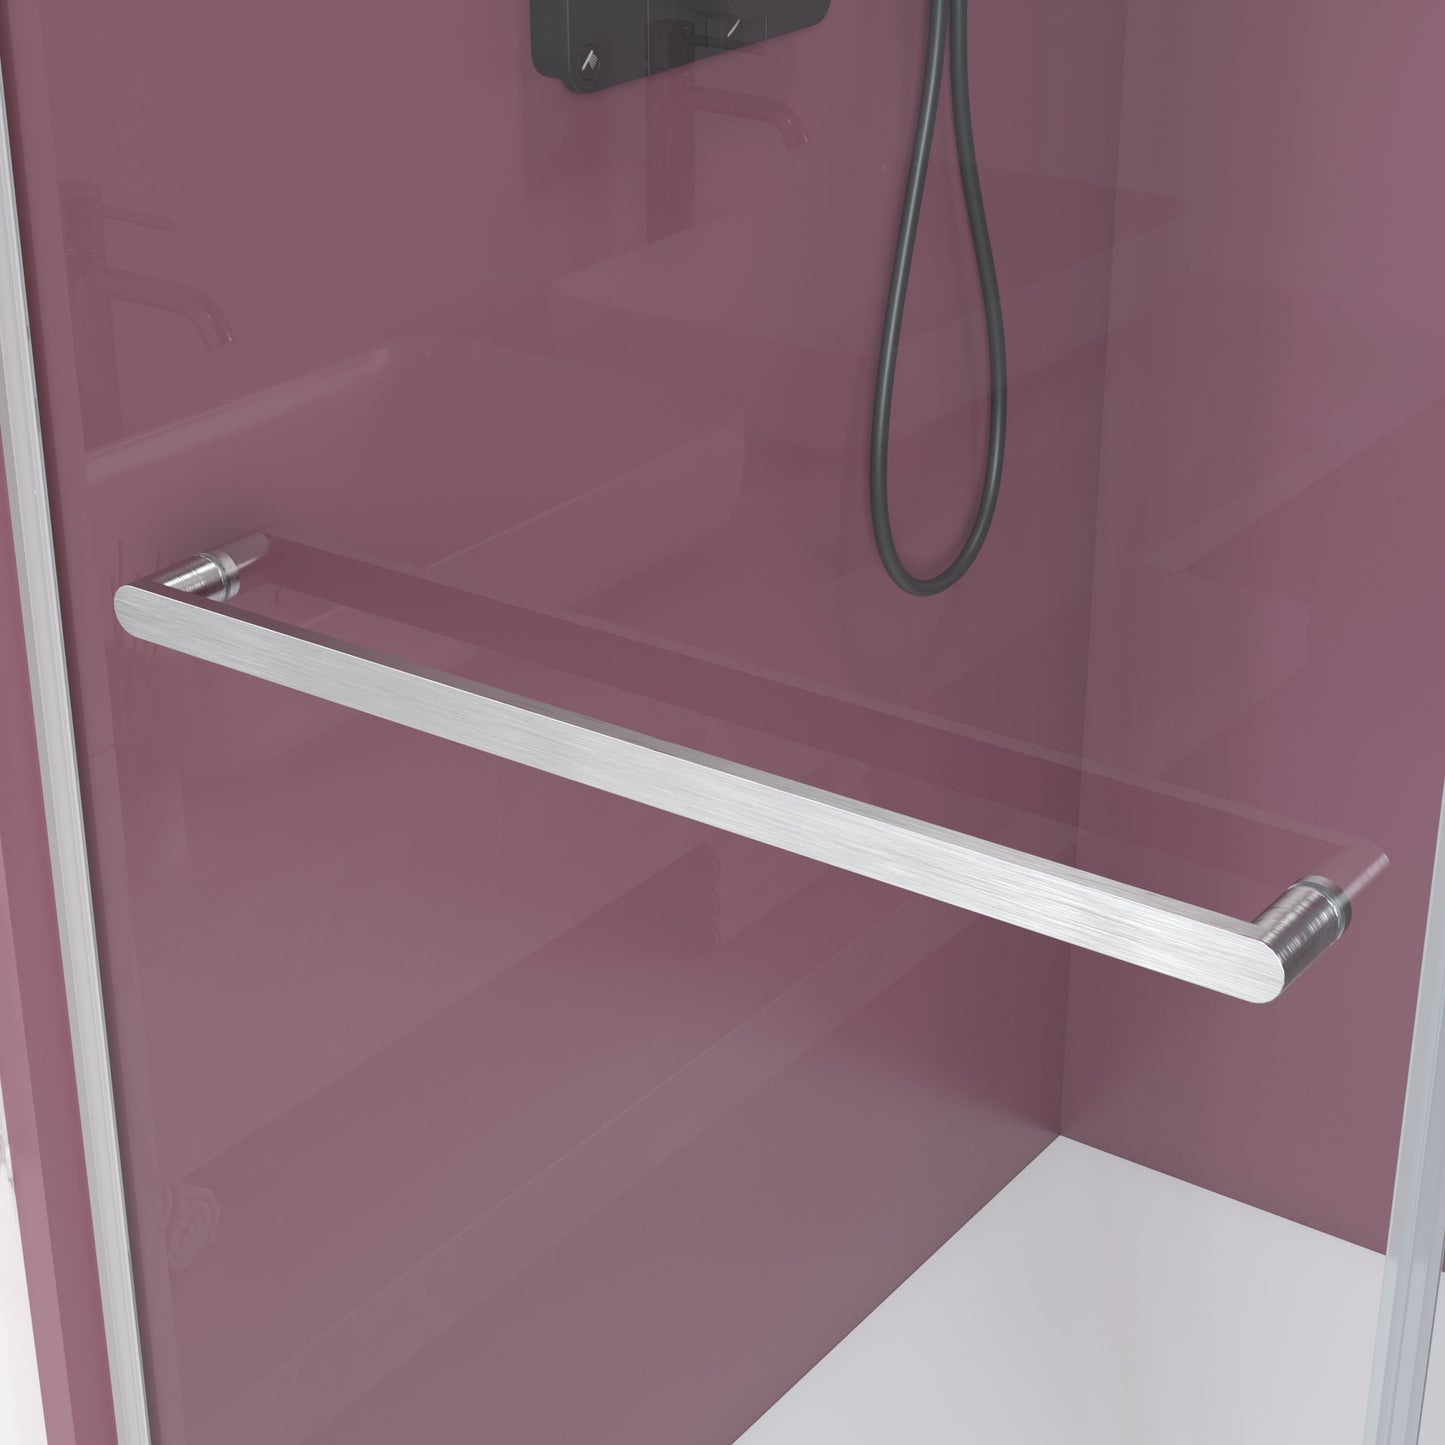 Gorgeous Double Sliding Frameless Shower Door With 3/8 Inch Clear Glass color:brushed nickel